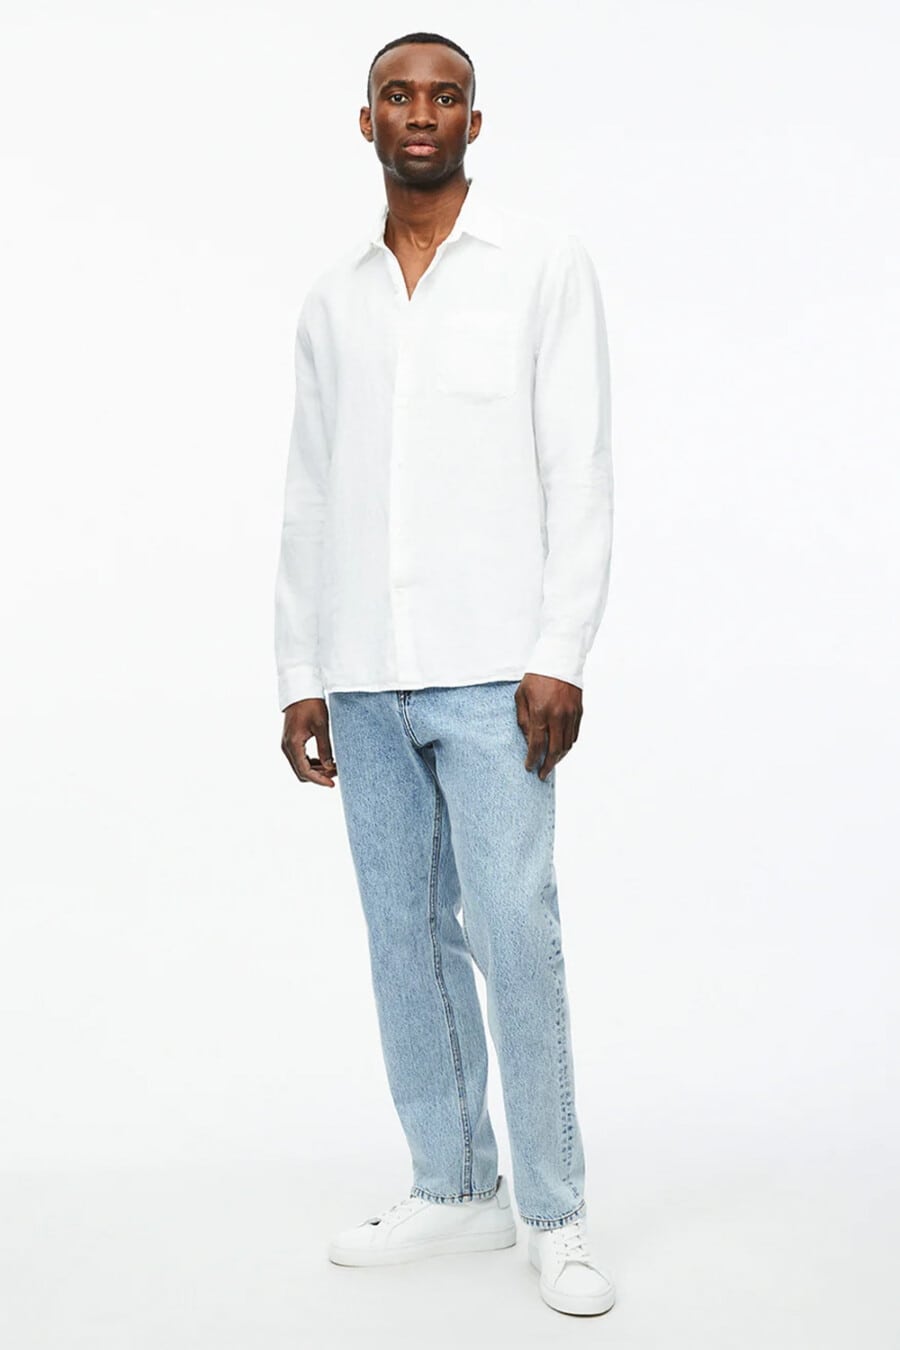 Men's light wash jeans, white shirt and white sneakers outfit